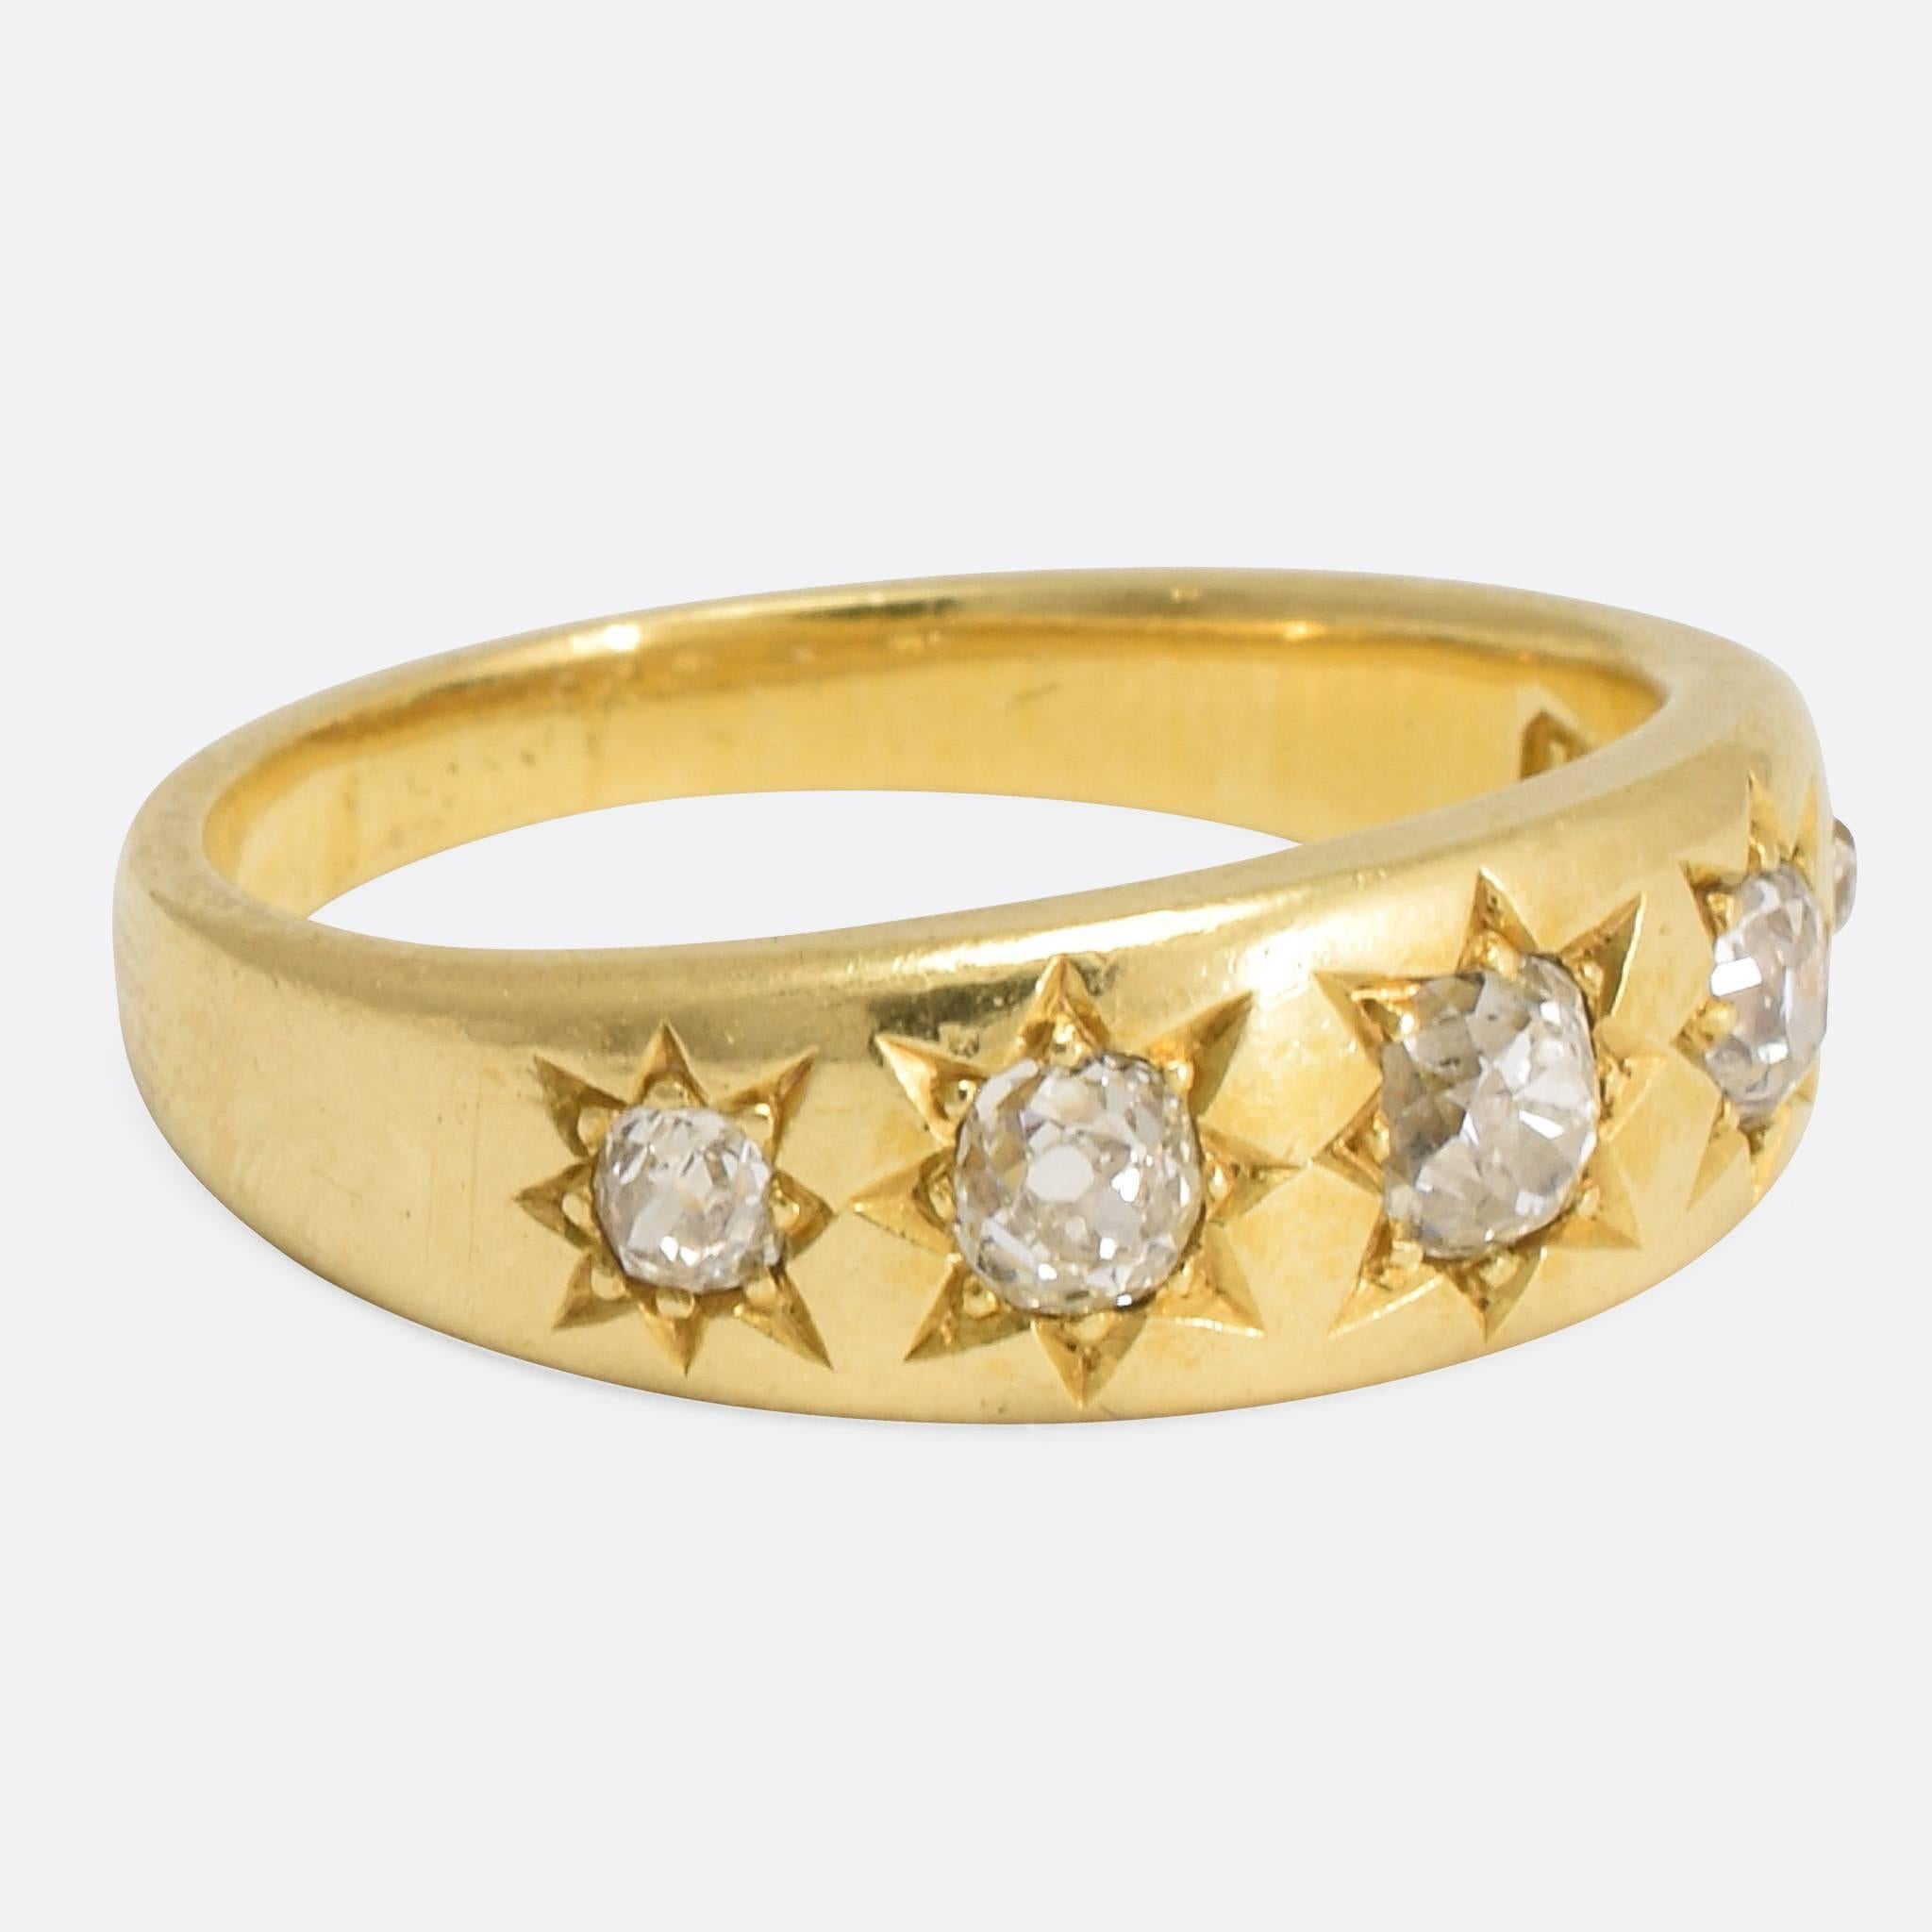 A wonderful antique band ring, set with five cushion cut diamonds mounted in attractive eight-point star settings. Modelled in 18k yellow gold, the ring dates to the late 19th Century and the total diamond weight is 0.74ct. Ring size: 7.25.